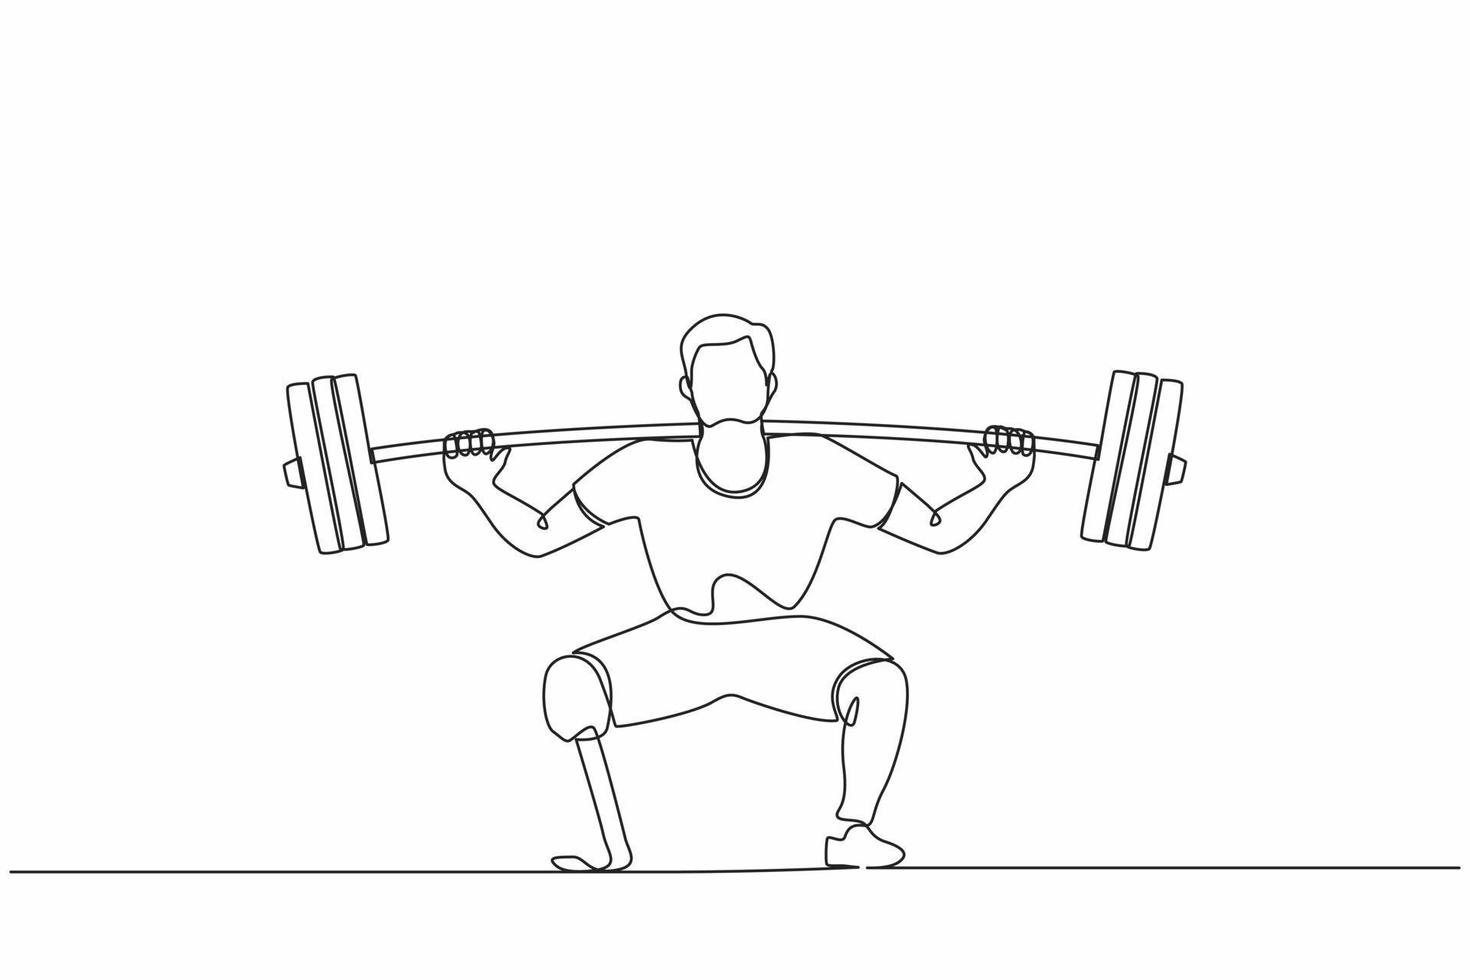 Single one line drawing disabled man weightlifter with amputated legs. Athletic weightlifting workout with barbell muscles sport strongman beautiful body fitness. Continuous line design graphic vector